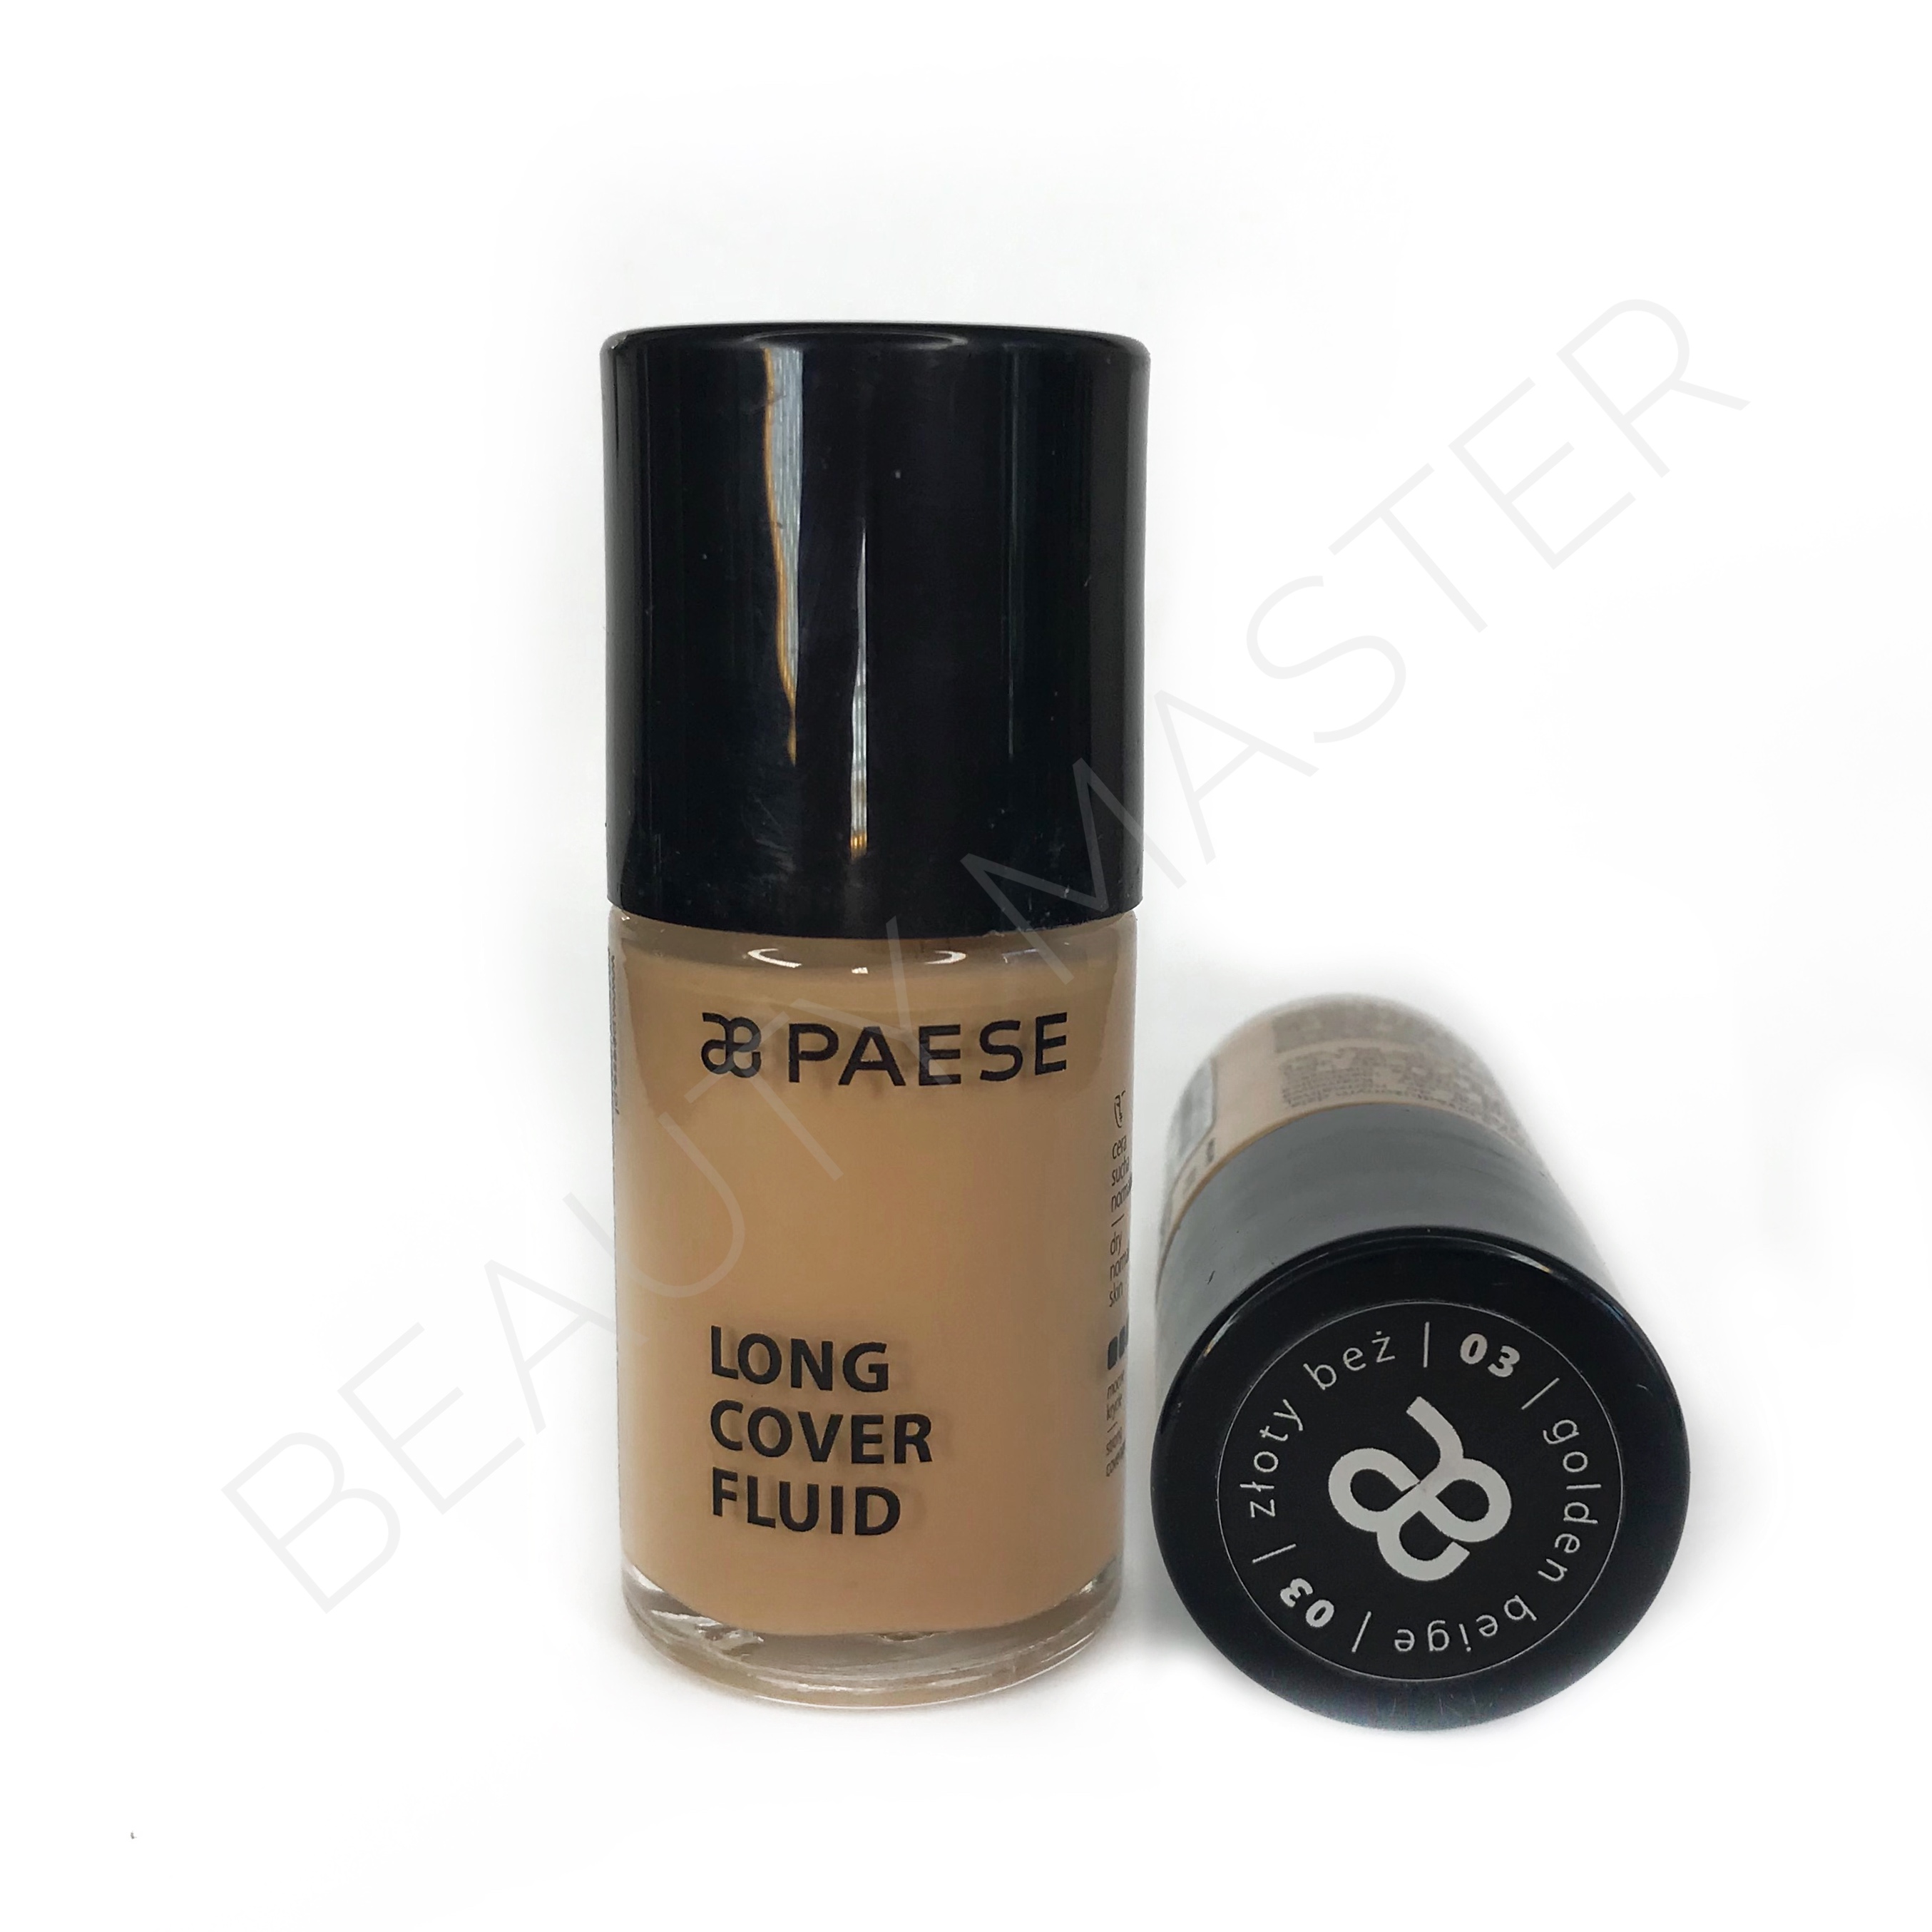 PAESE Long Cover Fluid 03